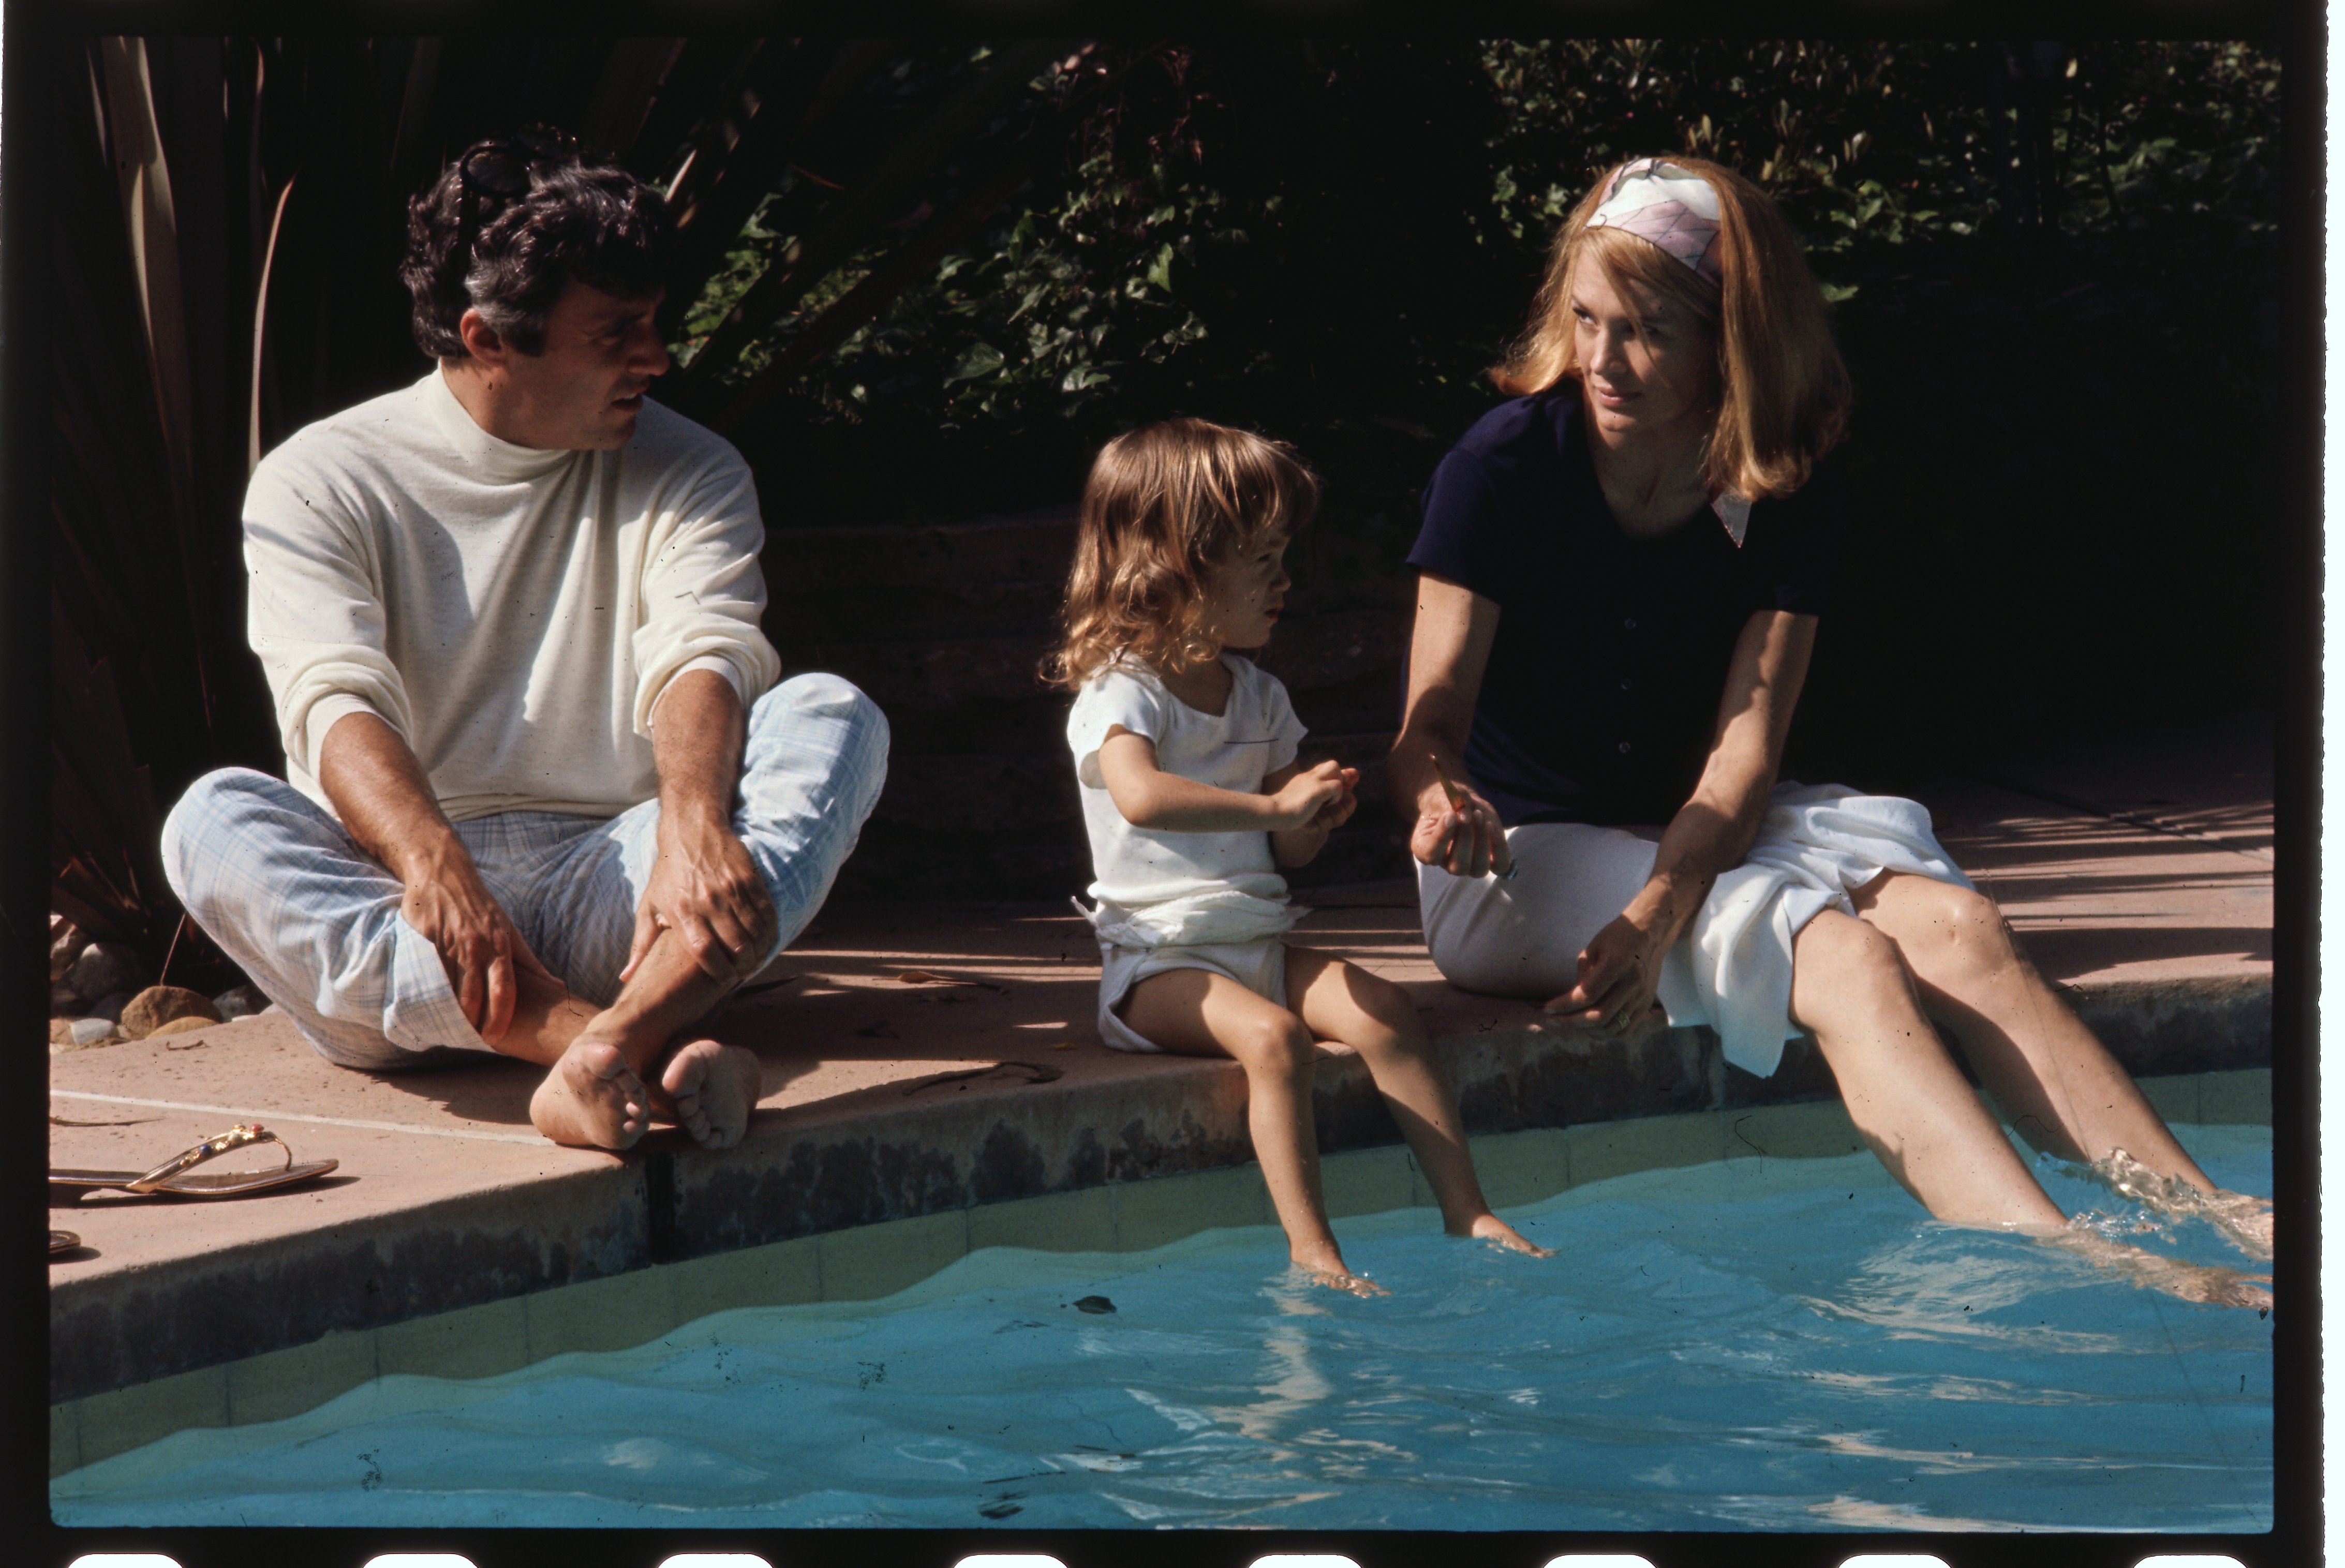 Burt Bacharach, Lea Nikki Bacharach, and Angie Dickinson on the grounds and around the swimming pool of their Hollywood home on June 3, 1969 | Source: Getty Images